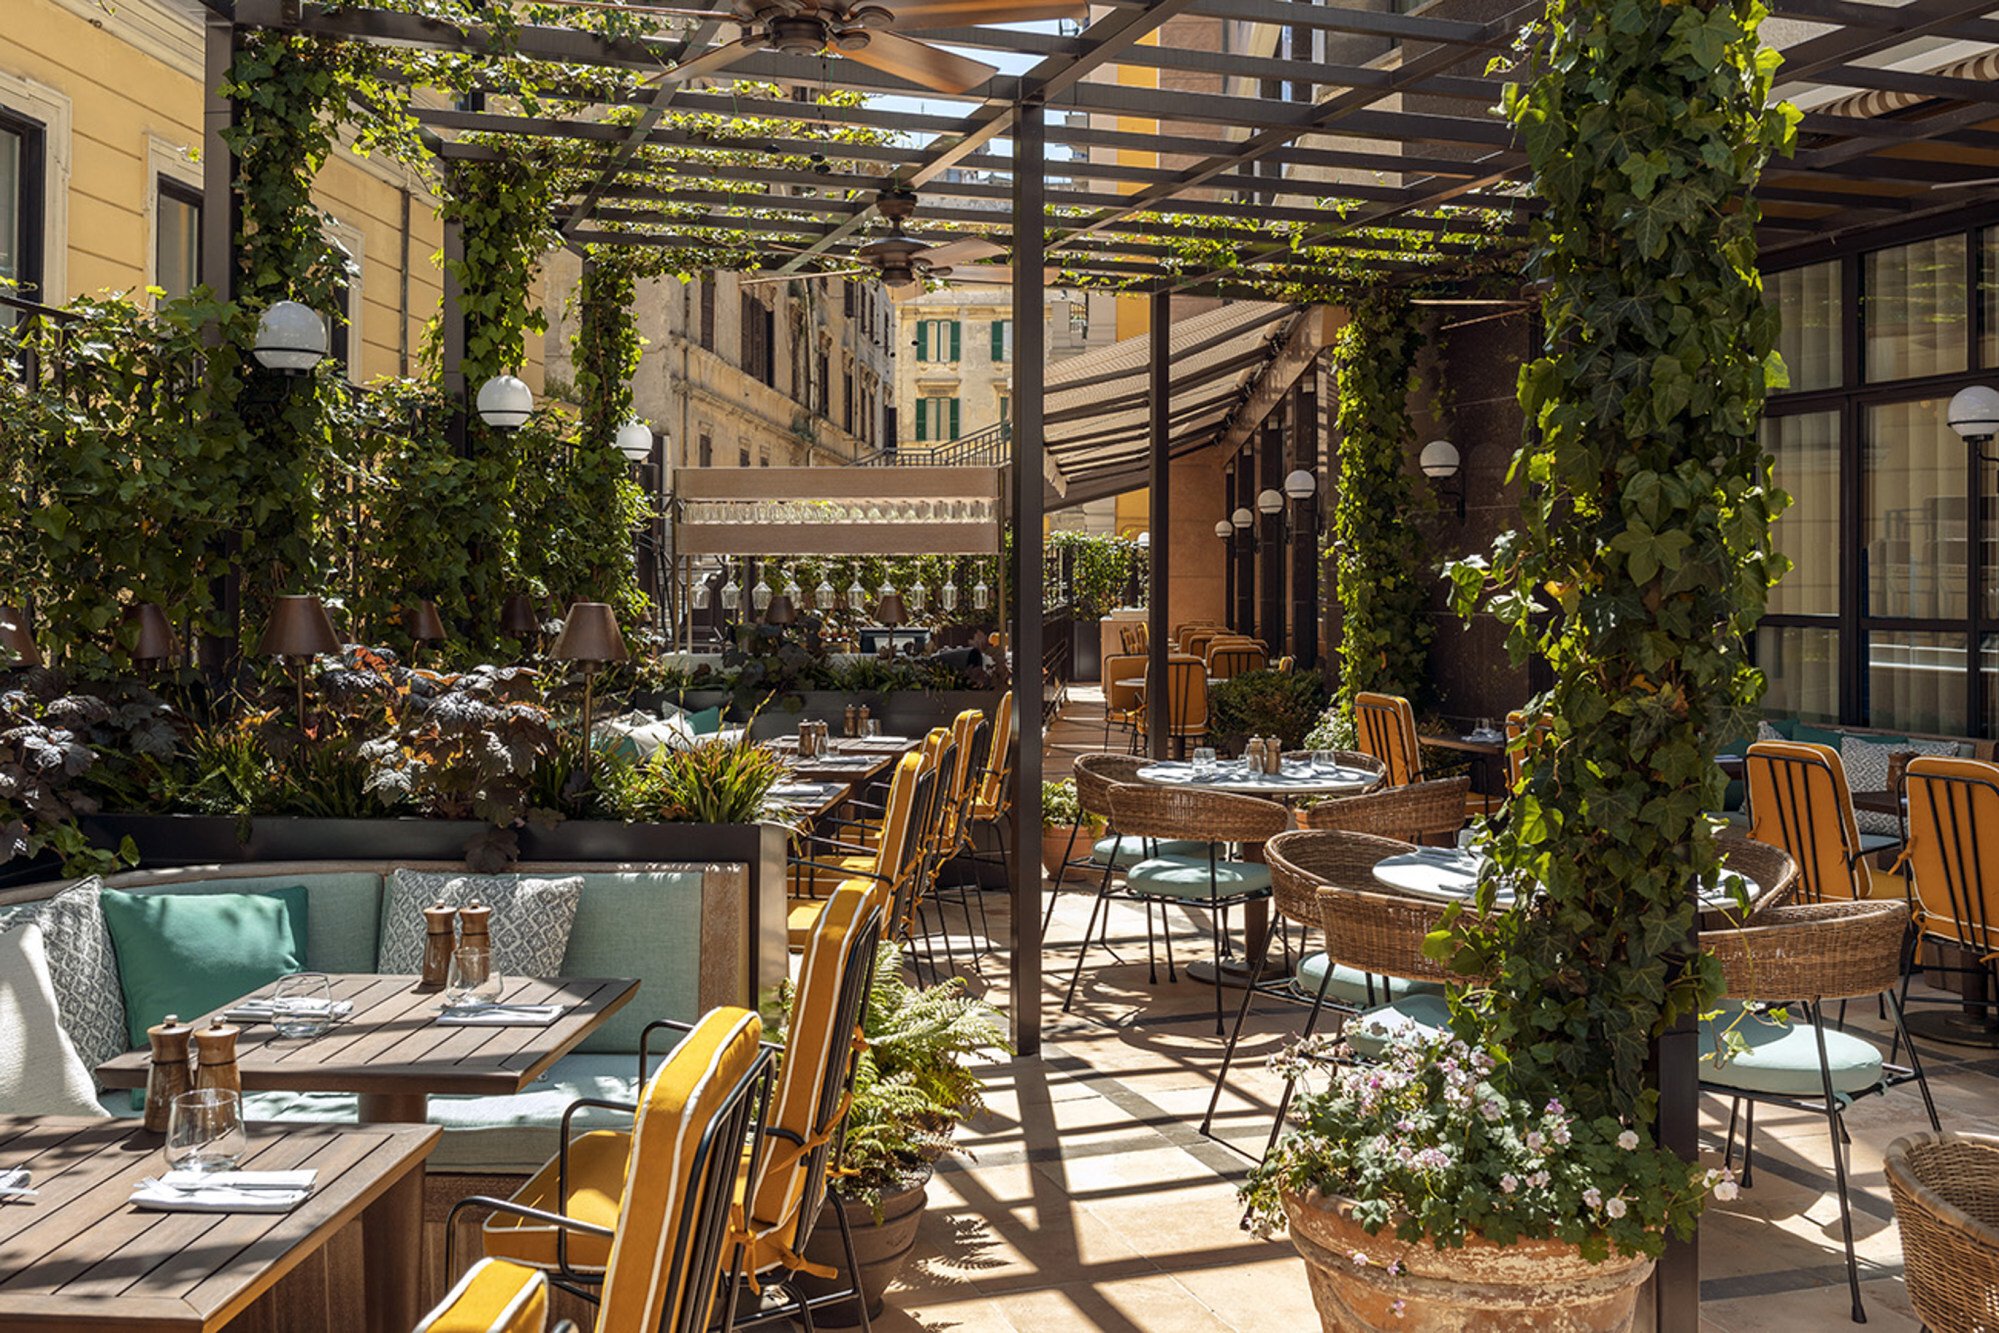 Hoxton Rome’s all-day dining spot Cugino is run in partnership with a local bakery. Photo: Hoxton Hotel